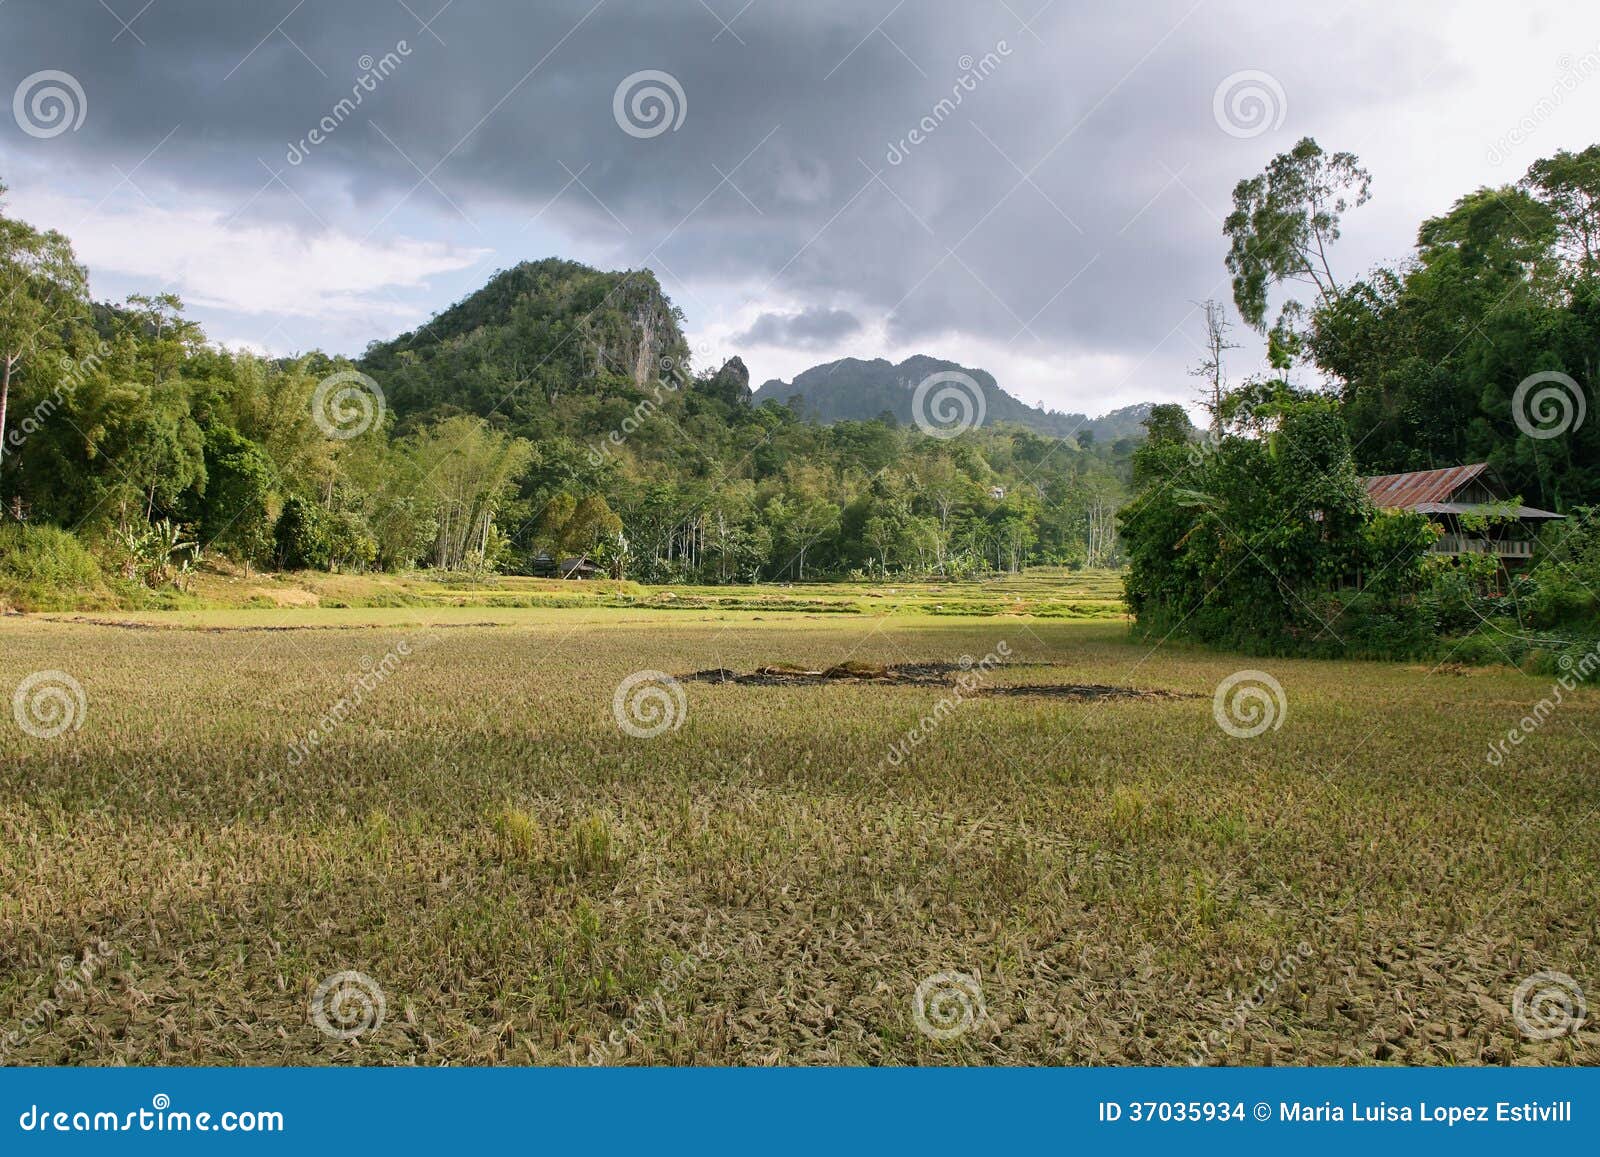 landscape of paddies and mountains in sulawesi